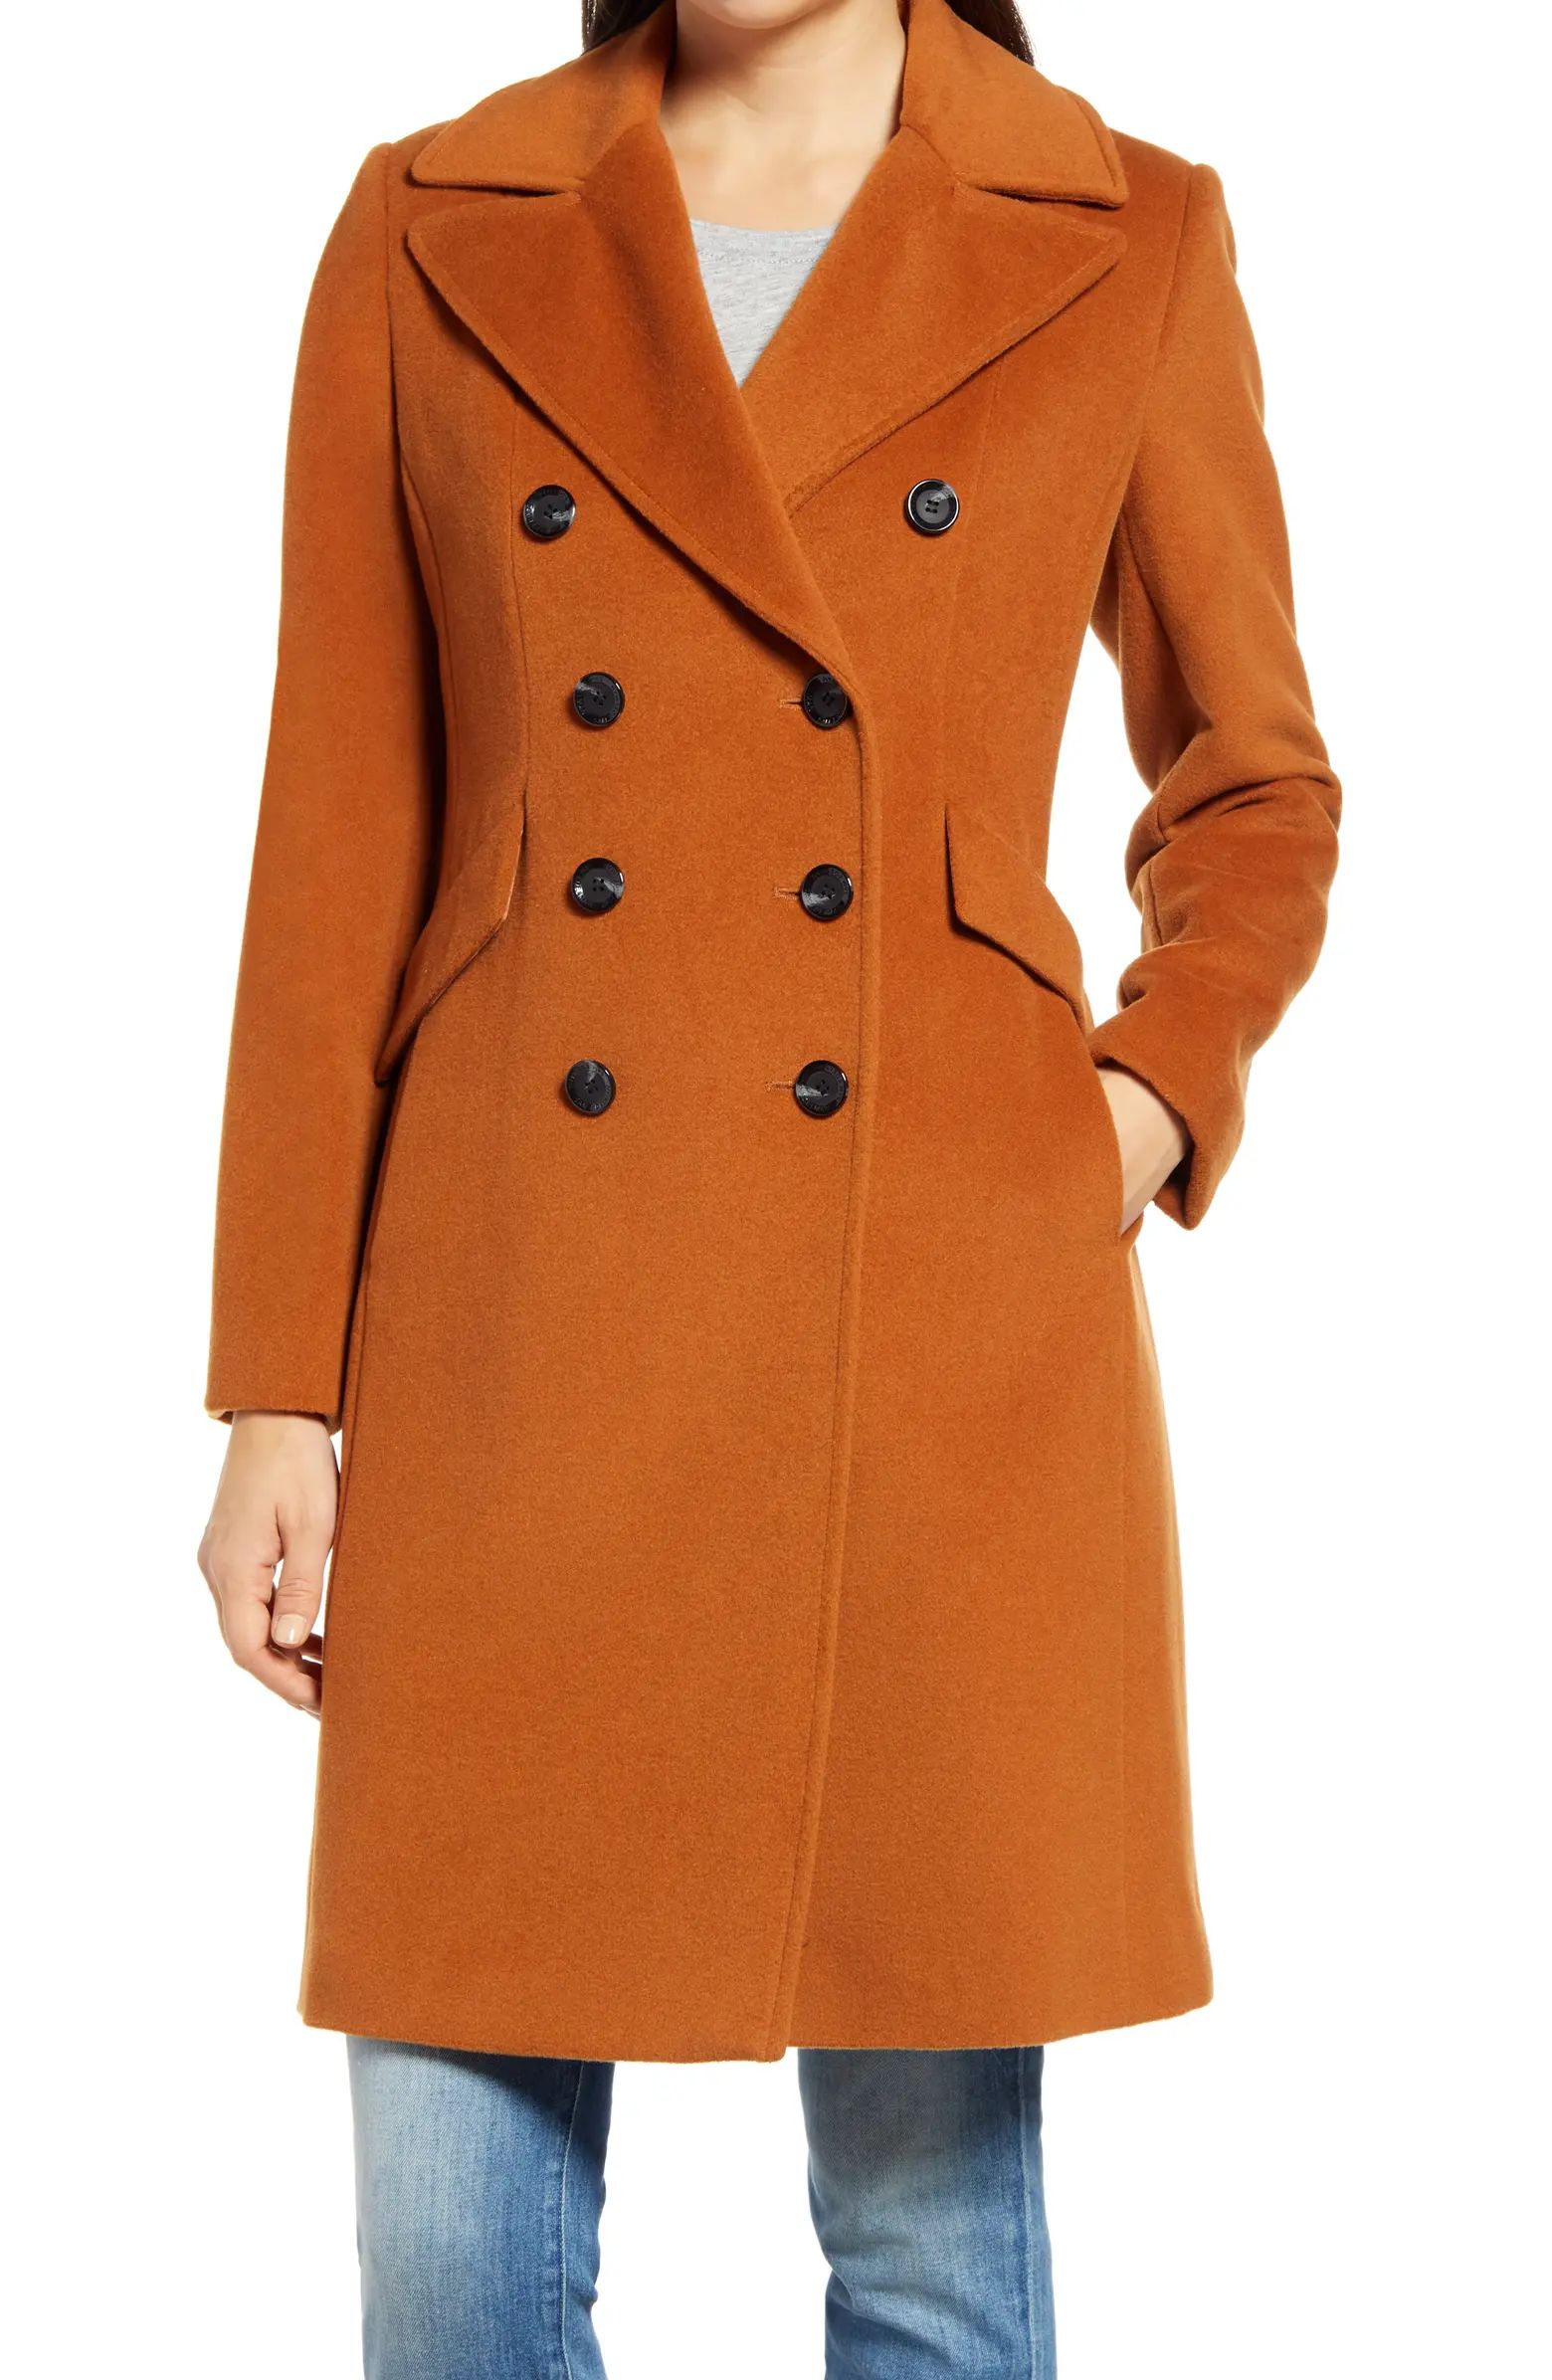 Double Breasted Wool Blend Coat | Nordstrom